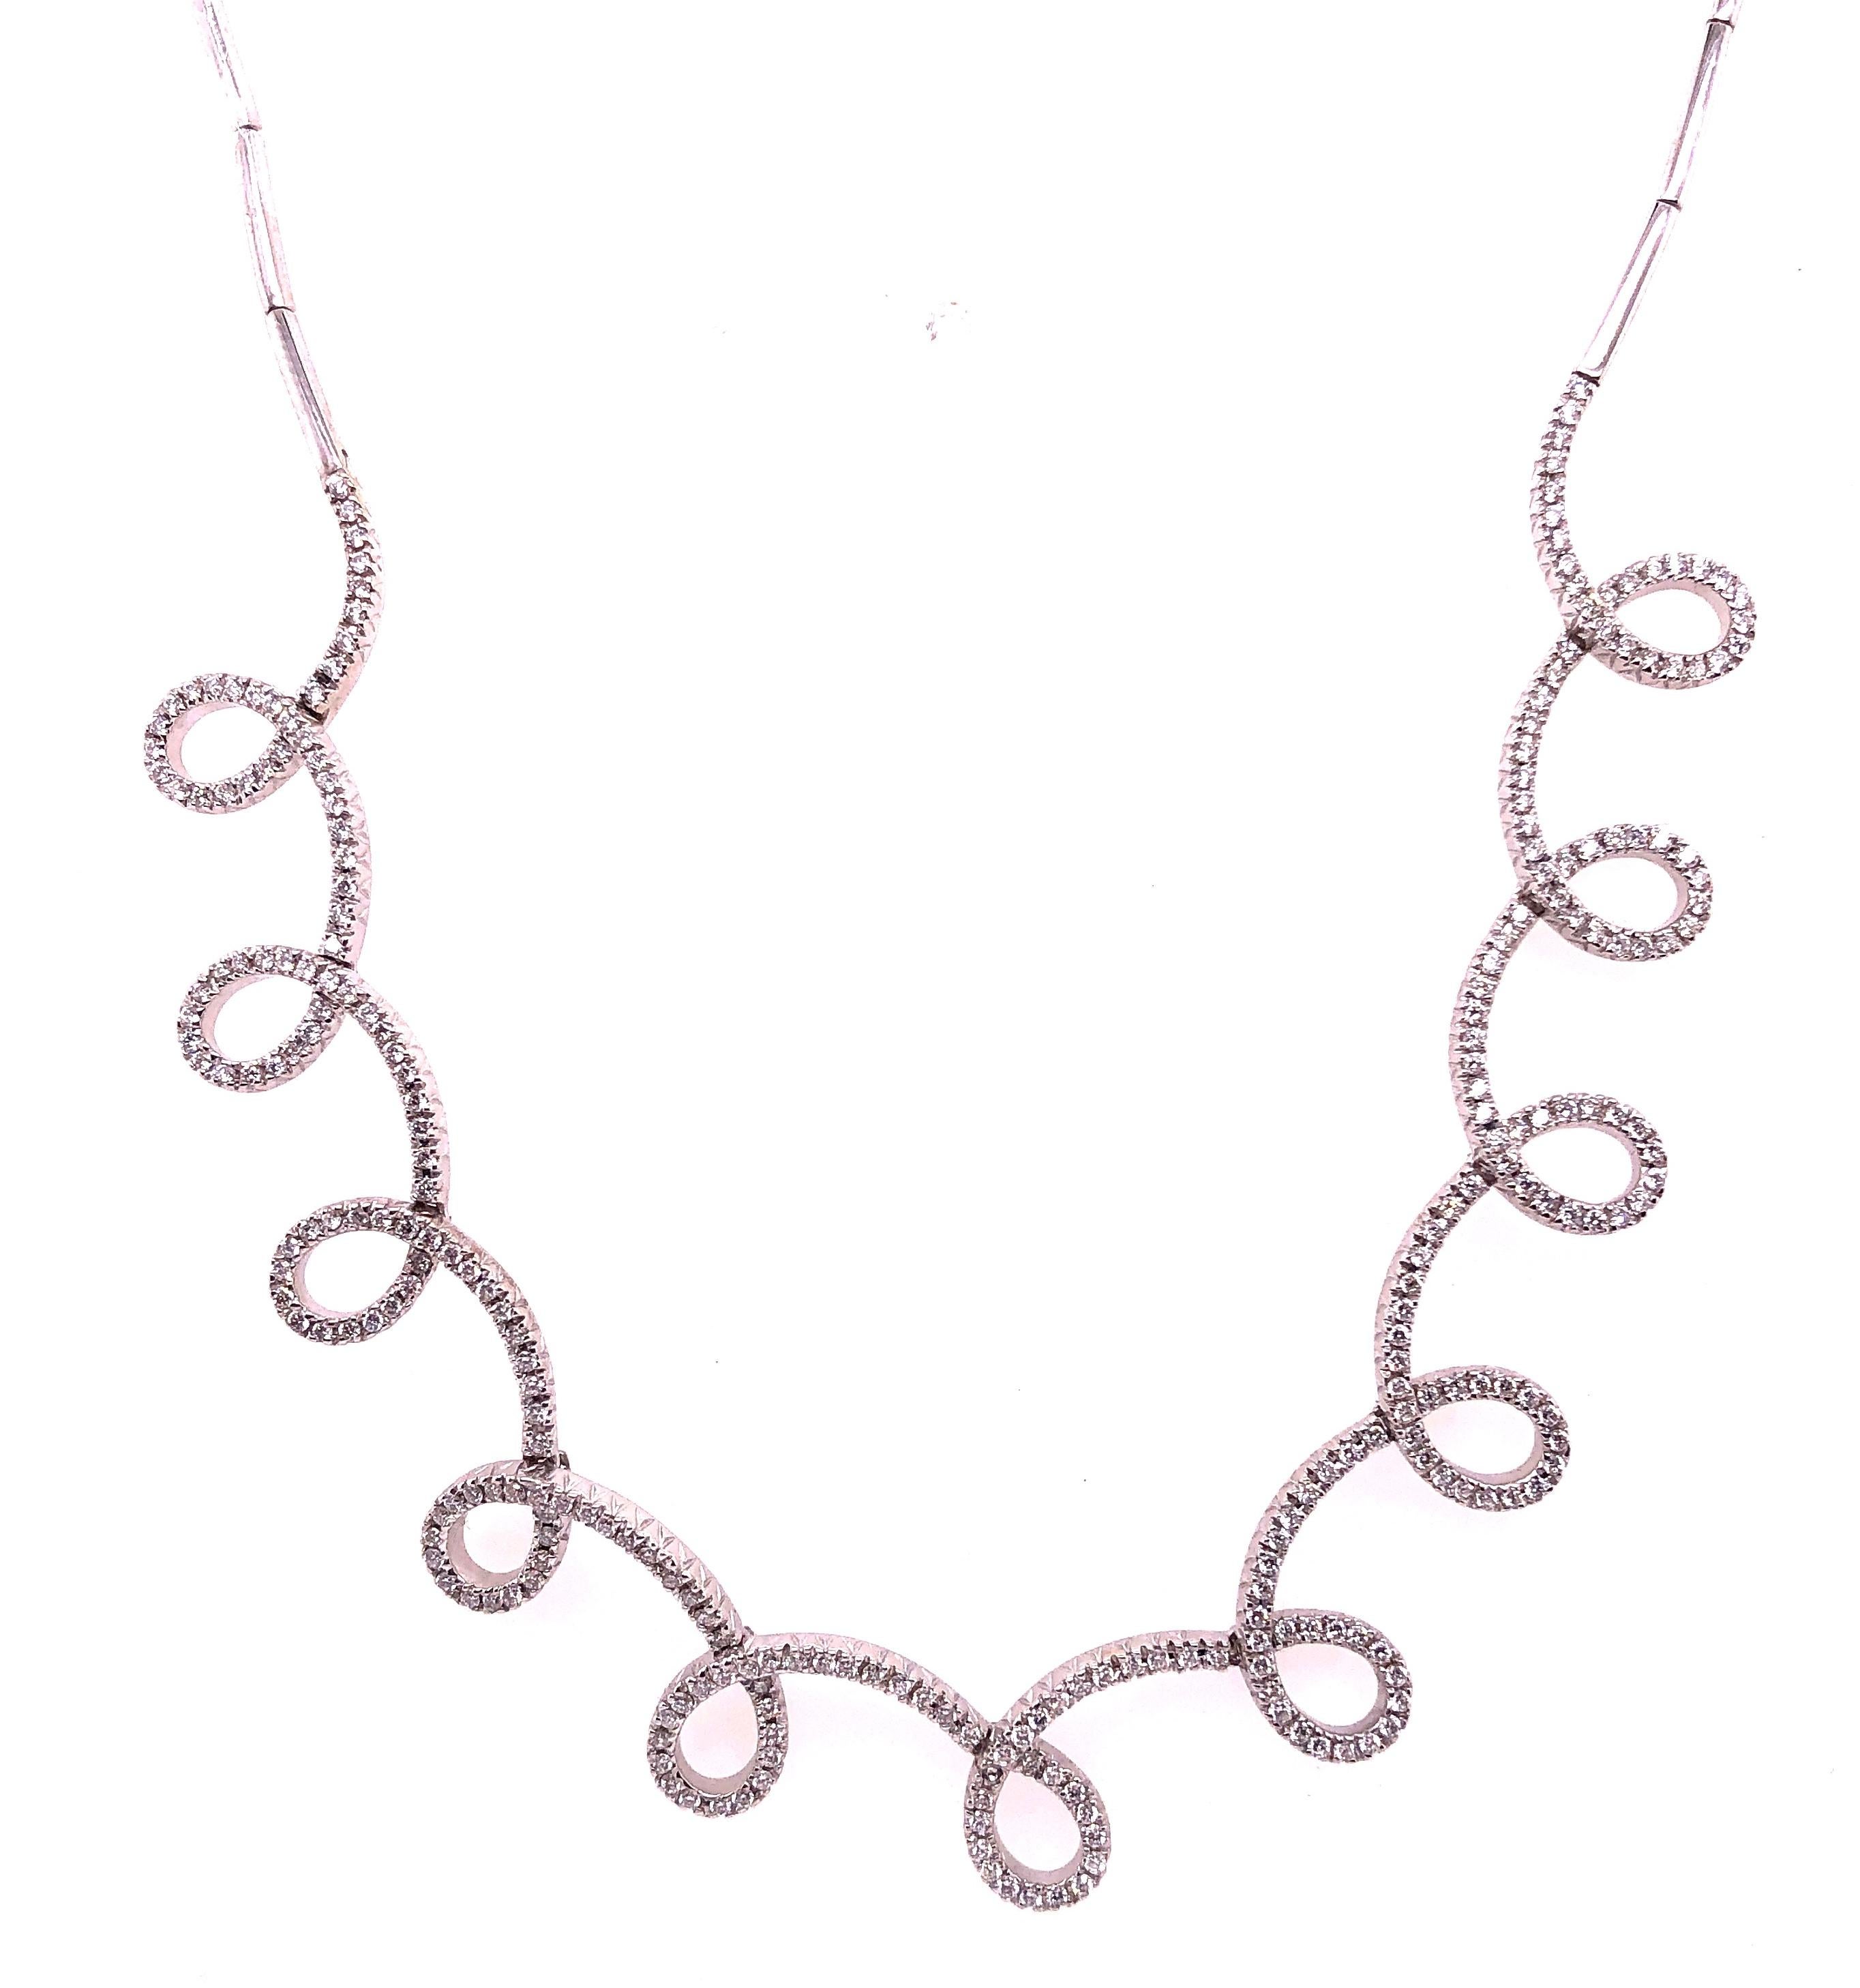 Contemporary 18 Karat White Gold and Diamond Swirl Necklace by H2 at Hammerman For Sale